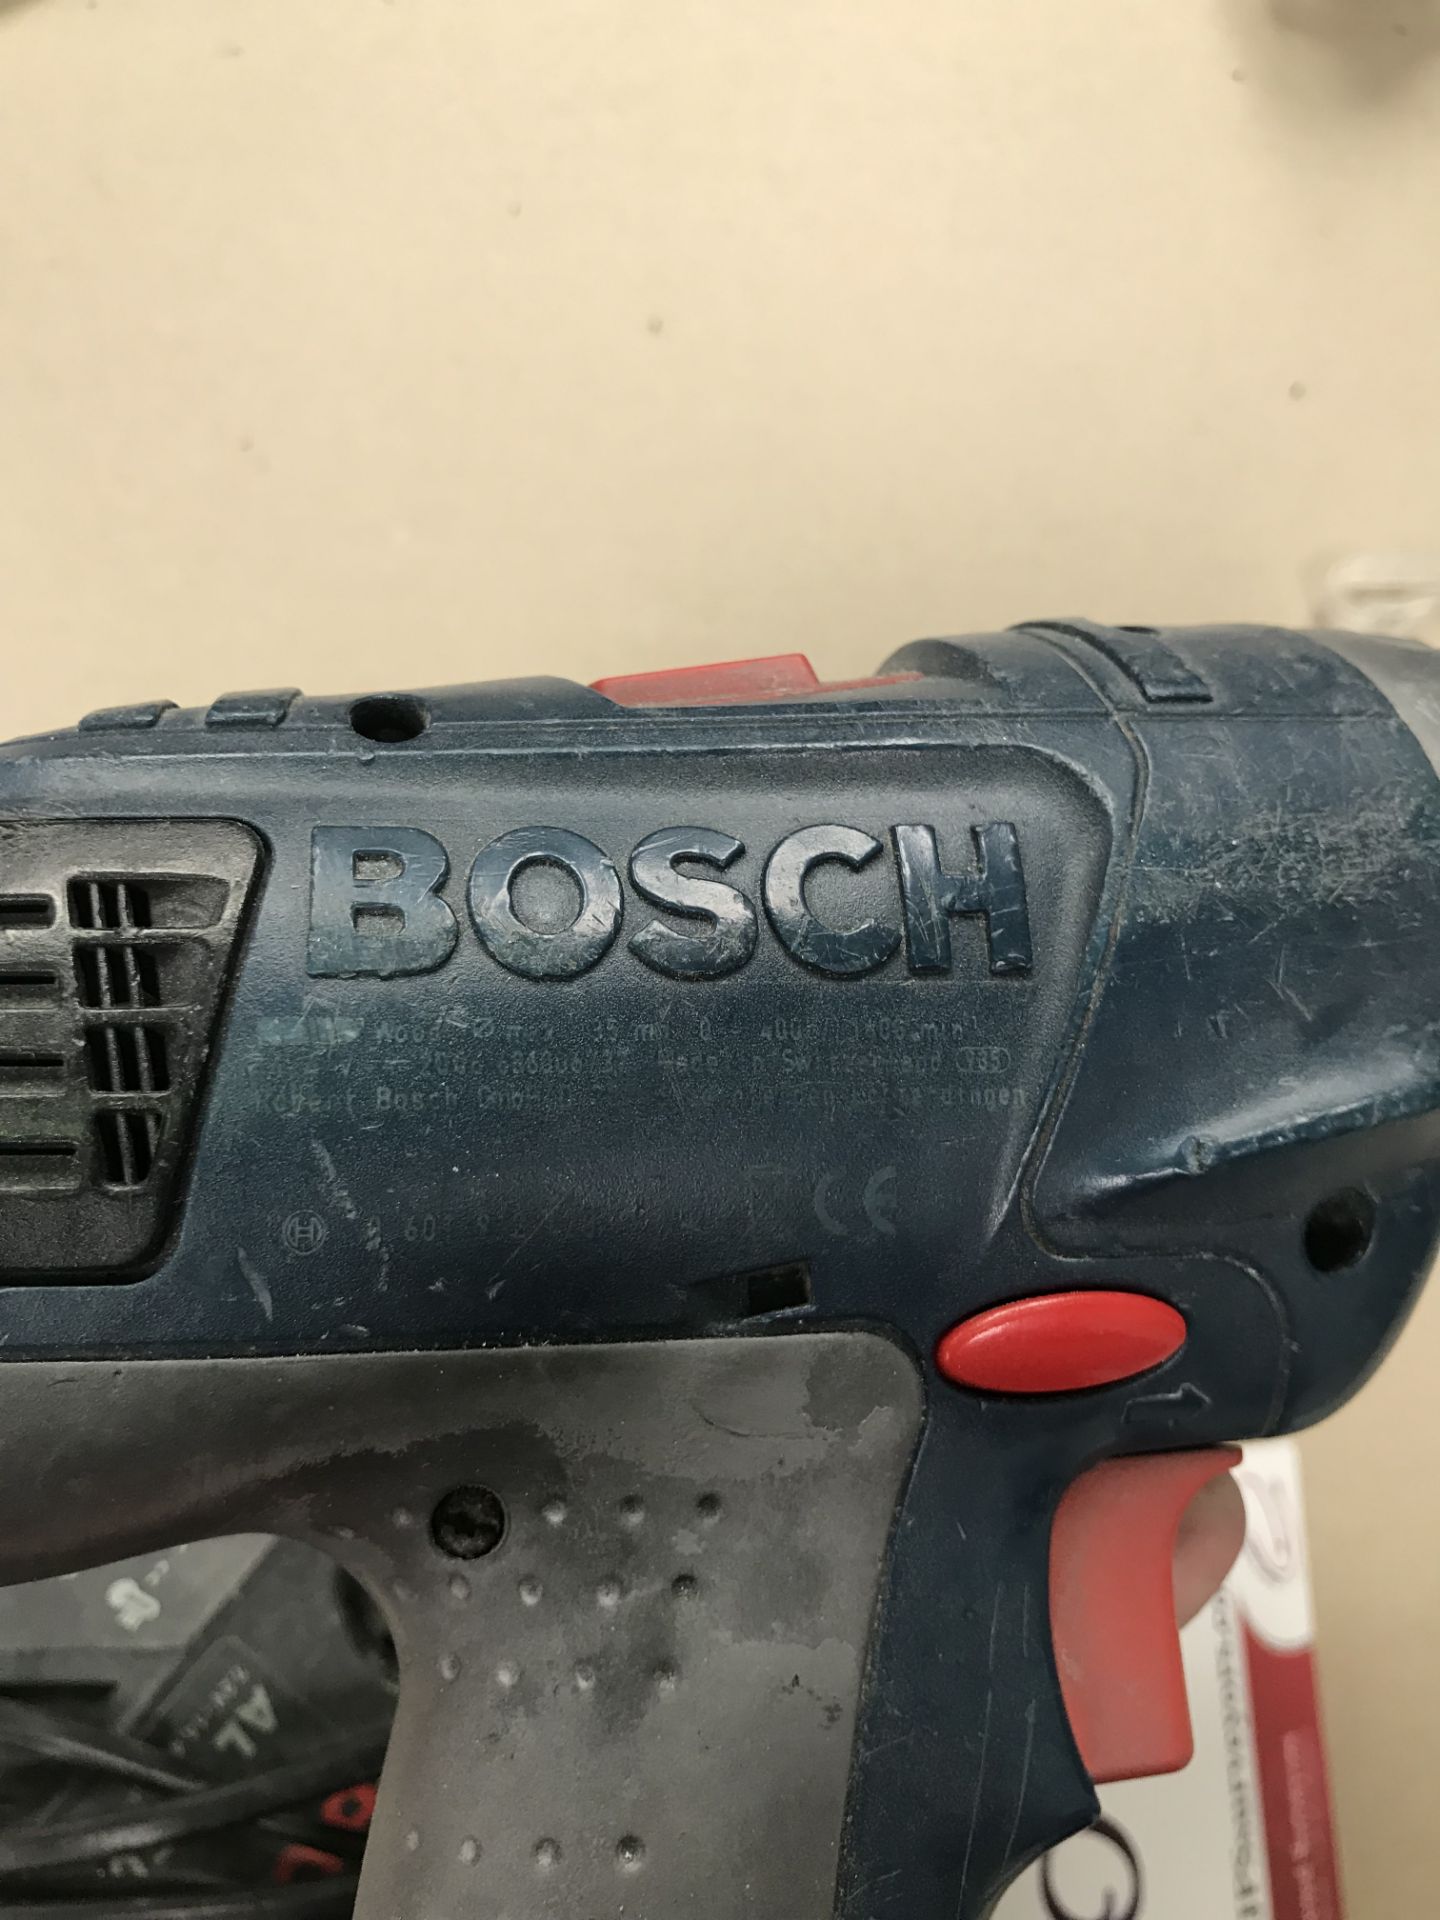 Bosch Power Drill w/ Charging Station - No sticker for model - Image 4 of 4